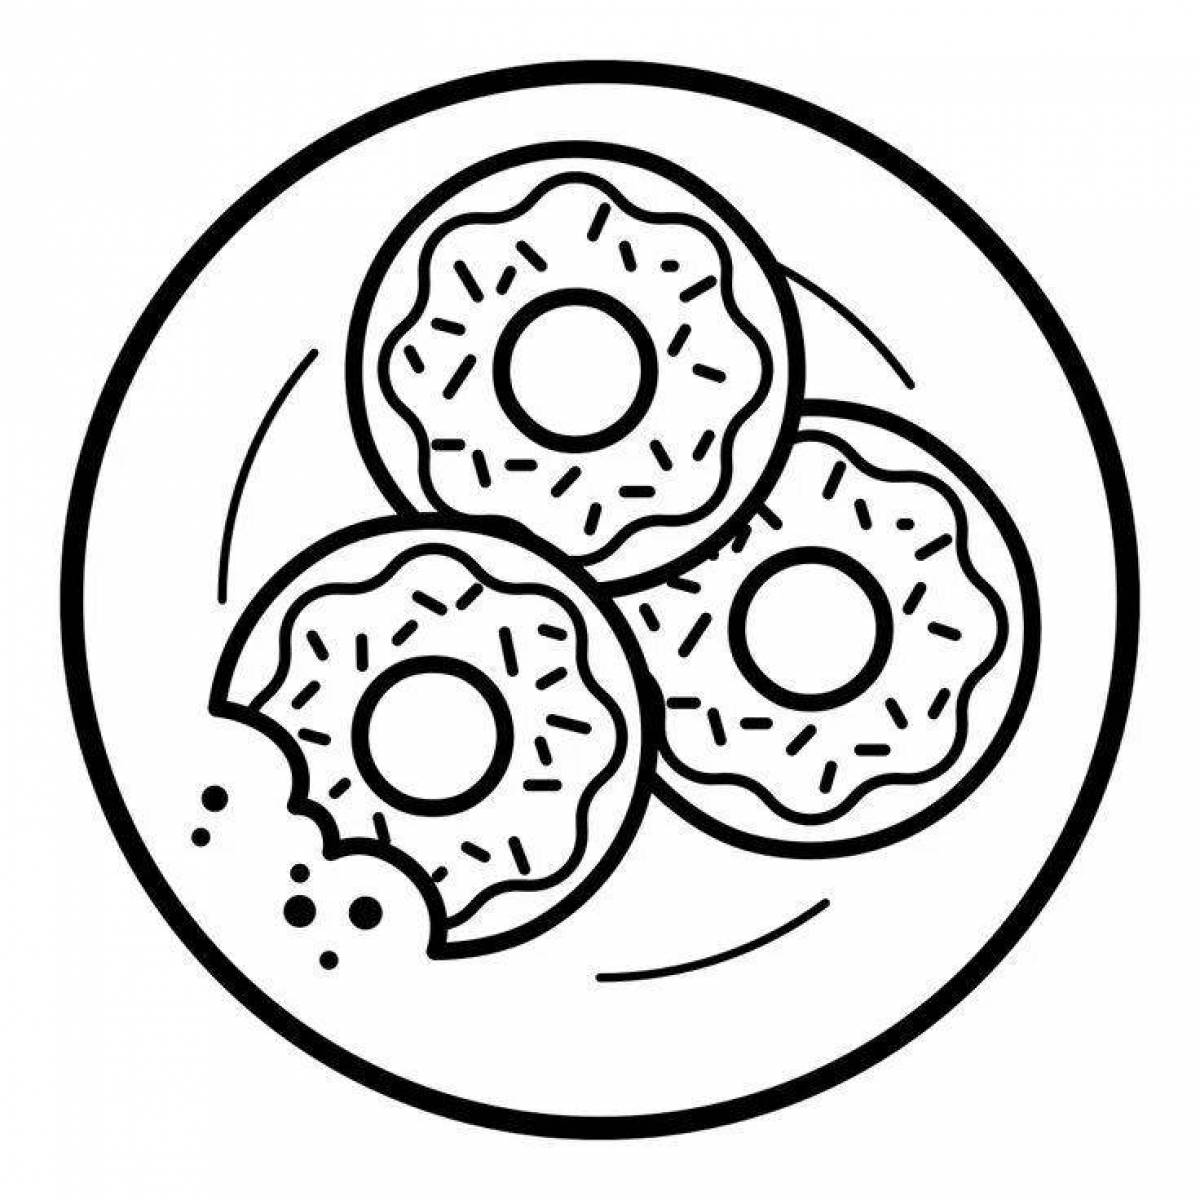 Exquisite donut coloring for kids